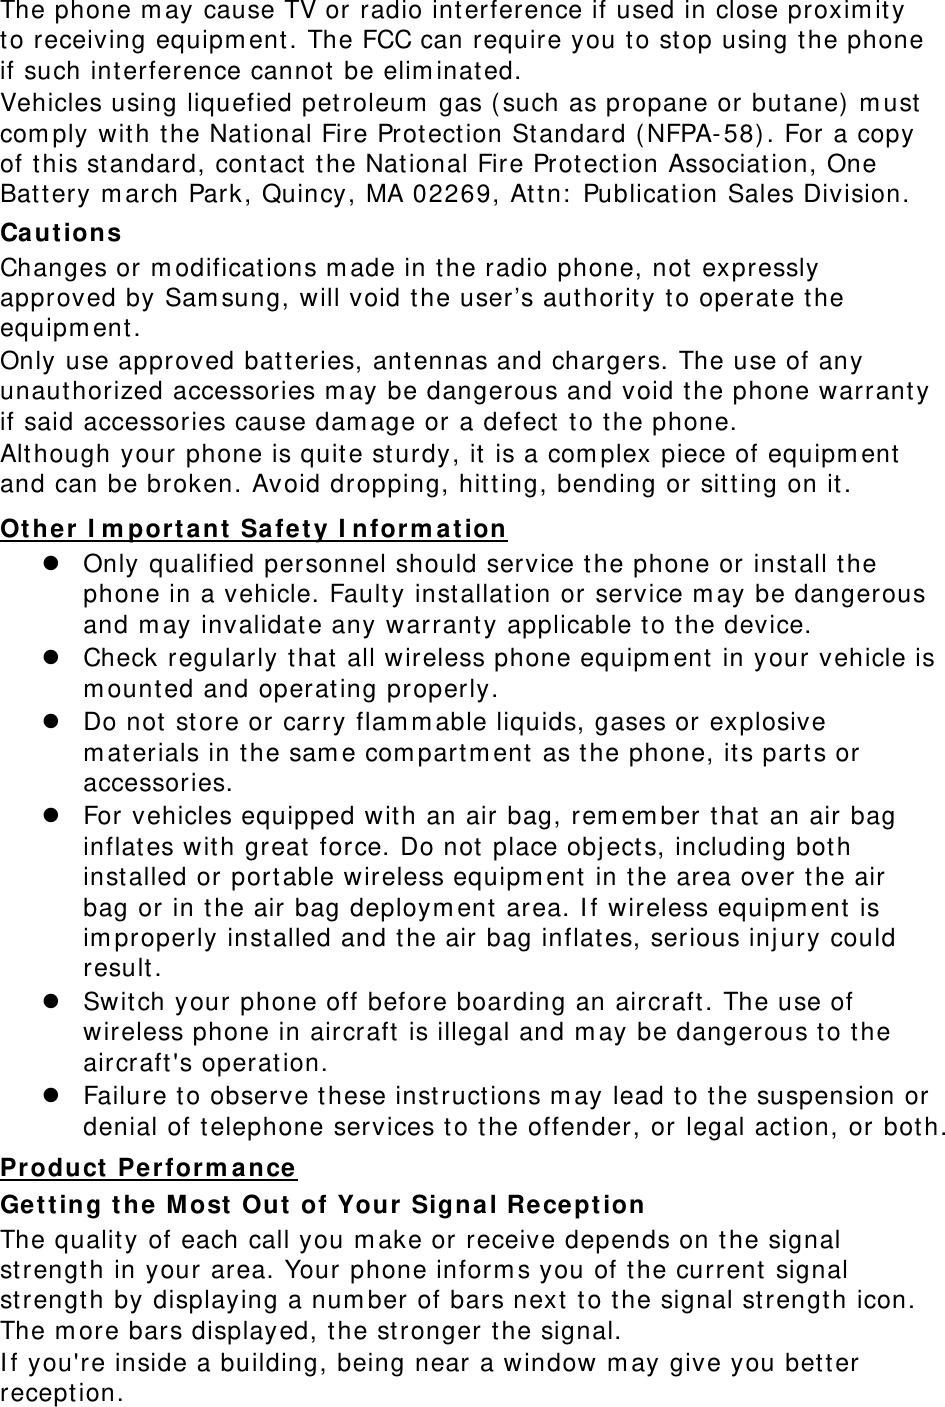 The phone m ay cause TV or radio int erference if used in close proxim it y to receiving equipm ent. The FCC can require you to st op using t he phone if such int erference cannot be elim inat ed. Vehicles using liquefied petroleum  gas (such as propane or but ane)  m ust  com ply wit h the National Fire Protect ion St andard ( NFPA-58). For a copy of t his st andard, contact the National Fire Protection Association, One Bat tery m arch Park, Quincy, MA 02269, Attn:  Publication Sales Division. Ca ut ions Changes or m odifications m ade in the radio phone, not expressly approved by Sam sung, will void t he user’s aut horit y t o operat e the equipm ent . Only use approved bat teries, ant ennas and chargers. The use of any unauthorized accessories m ay be dangerous and void t he phone warrant y if said accessories cause dam age or a defect  t o t he phone. Alt hough your phone is quite st urdy, it  is a com plex piece of equipm ent  and can be broken. Avoid dropping, hitting, bending or sit ting on it . Ot he r I m port a nt  Safety I nfor m a tion  Only qualified personnel should service the phone or inst all the phone in a vehicle. Faulty inst allation or service m ay be dangerous and m ay invalidat e any warrant y applicable t o the device.  Check regularly t hat all wireless phone equipm ent  in your vehicle is m ount ed and operating properly.  Do not  st ore or carry flam m able liquids, gases or explosive m aterials in t he sam e com part m ent  as the phone, its parts or accessories.  For vehicles equipped wit h an air bag, rem em ber t hat an air bag inflat es with great force. Do not place obj ect s, including both inst alled or portable wireless equipm ent  in the area over the air bag or in t he air bag deploym ent  area. I f wireless equipm ent  is im properly inst alled and t he air bag inflates, serious inj ury could result.  Swit ch your phone off before boarding an aircraft . The use of wireless phone in aircraft  is illegal and m ay be dangerous t o t he aircraft &apos;s operat ion.  Failure t o observe t hese inst ruct ions m ay lead t o t he suspension or denial of t elephone services to the offender, or legal act ion, or both. Product Perform ance Getting t he  Most  Out  of Your  Signa l Recept ion The quality of each call you m ake or receive depends on t he signal strength in your area. Your phone inform s you of t he current  signal strength by displaying a num ber of bars next to the signal strengt h icon. The m ore bars displayed, t he st ronger t he signal. I f you&apos;re inside a building, being near a window m ay give you bett er reception. 